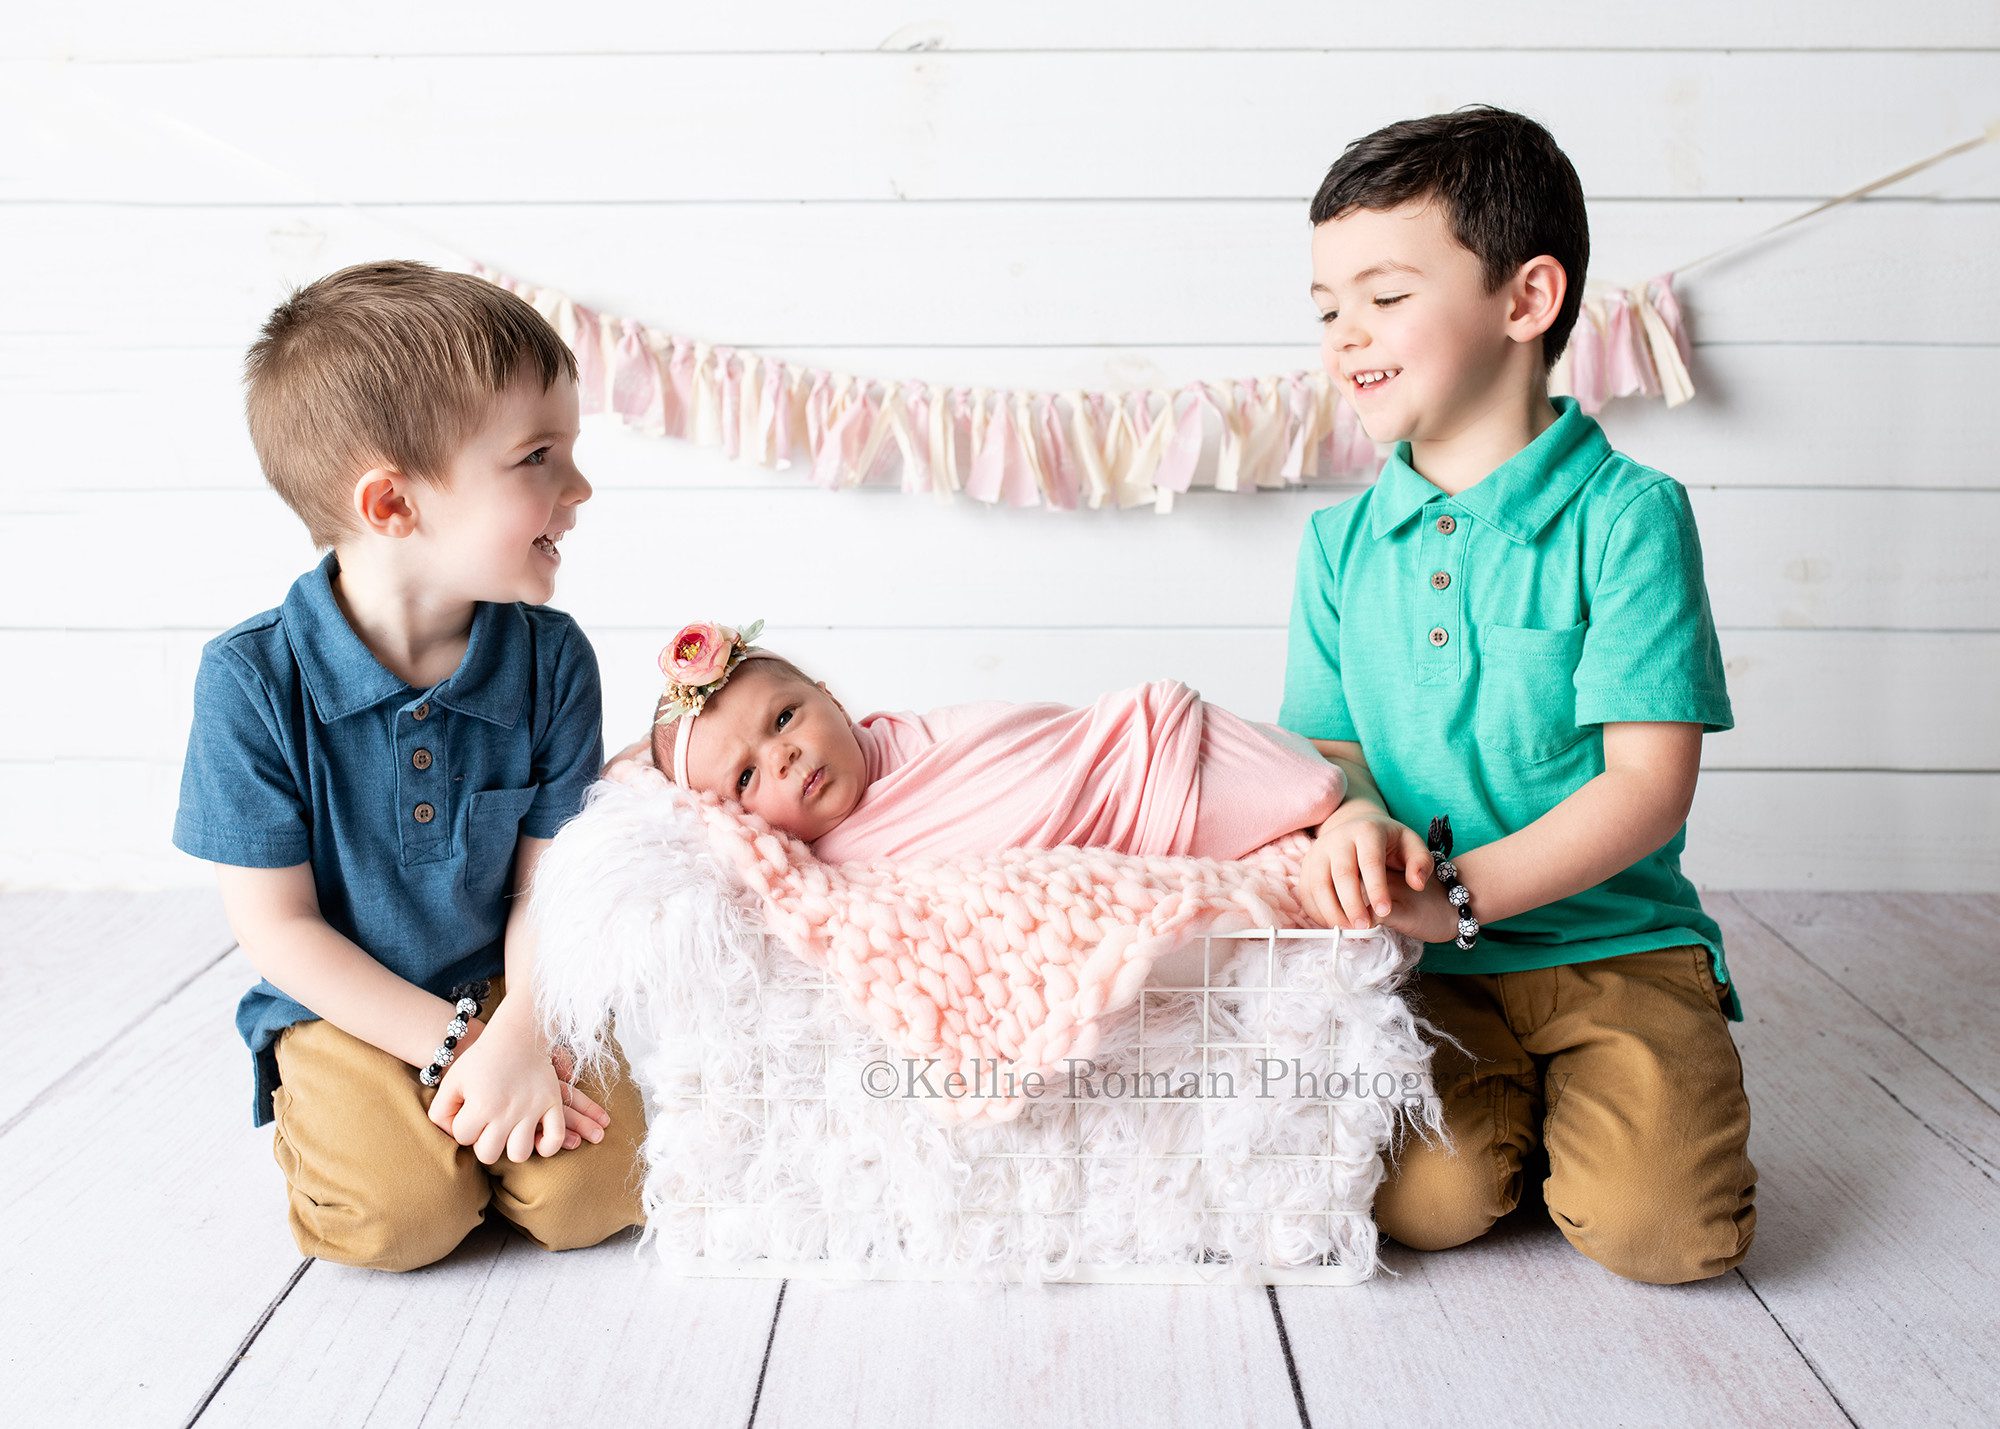 milwaukee studio newborn photographer. A newborn baby girl and her two toddler brothers are in a milwaukee photographer studio in greendale. The baby girl is wrapped in a light pink wrap, and has flower headband on. She is awake and laying on her side in a white wire crate filled with pink and white furs. Her brothers are on each side of the crate looking at each other smiling. The boys are wearing khakis and polo shirts that are blue and teal.